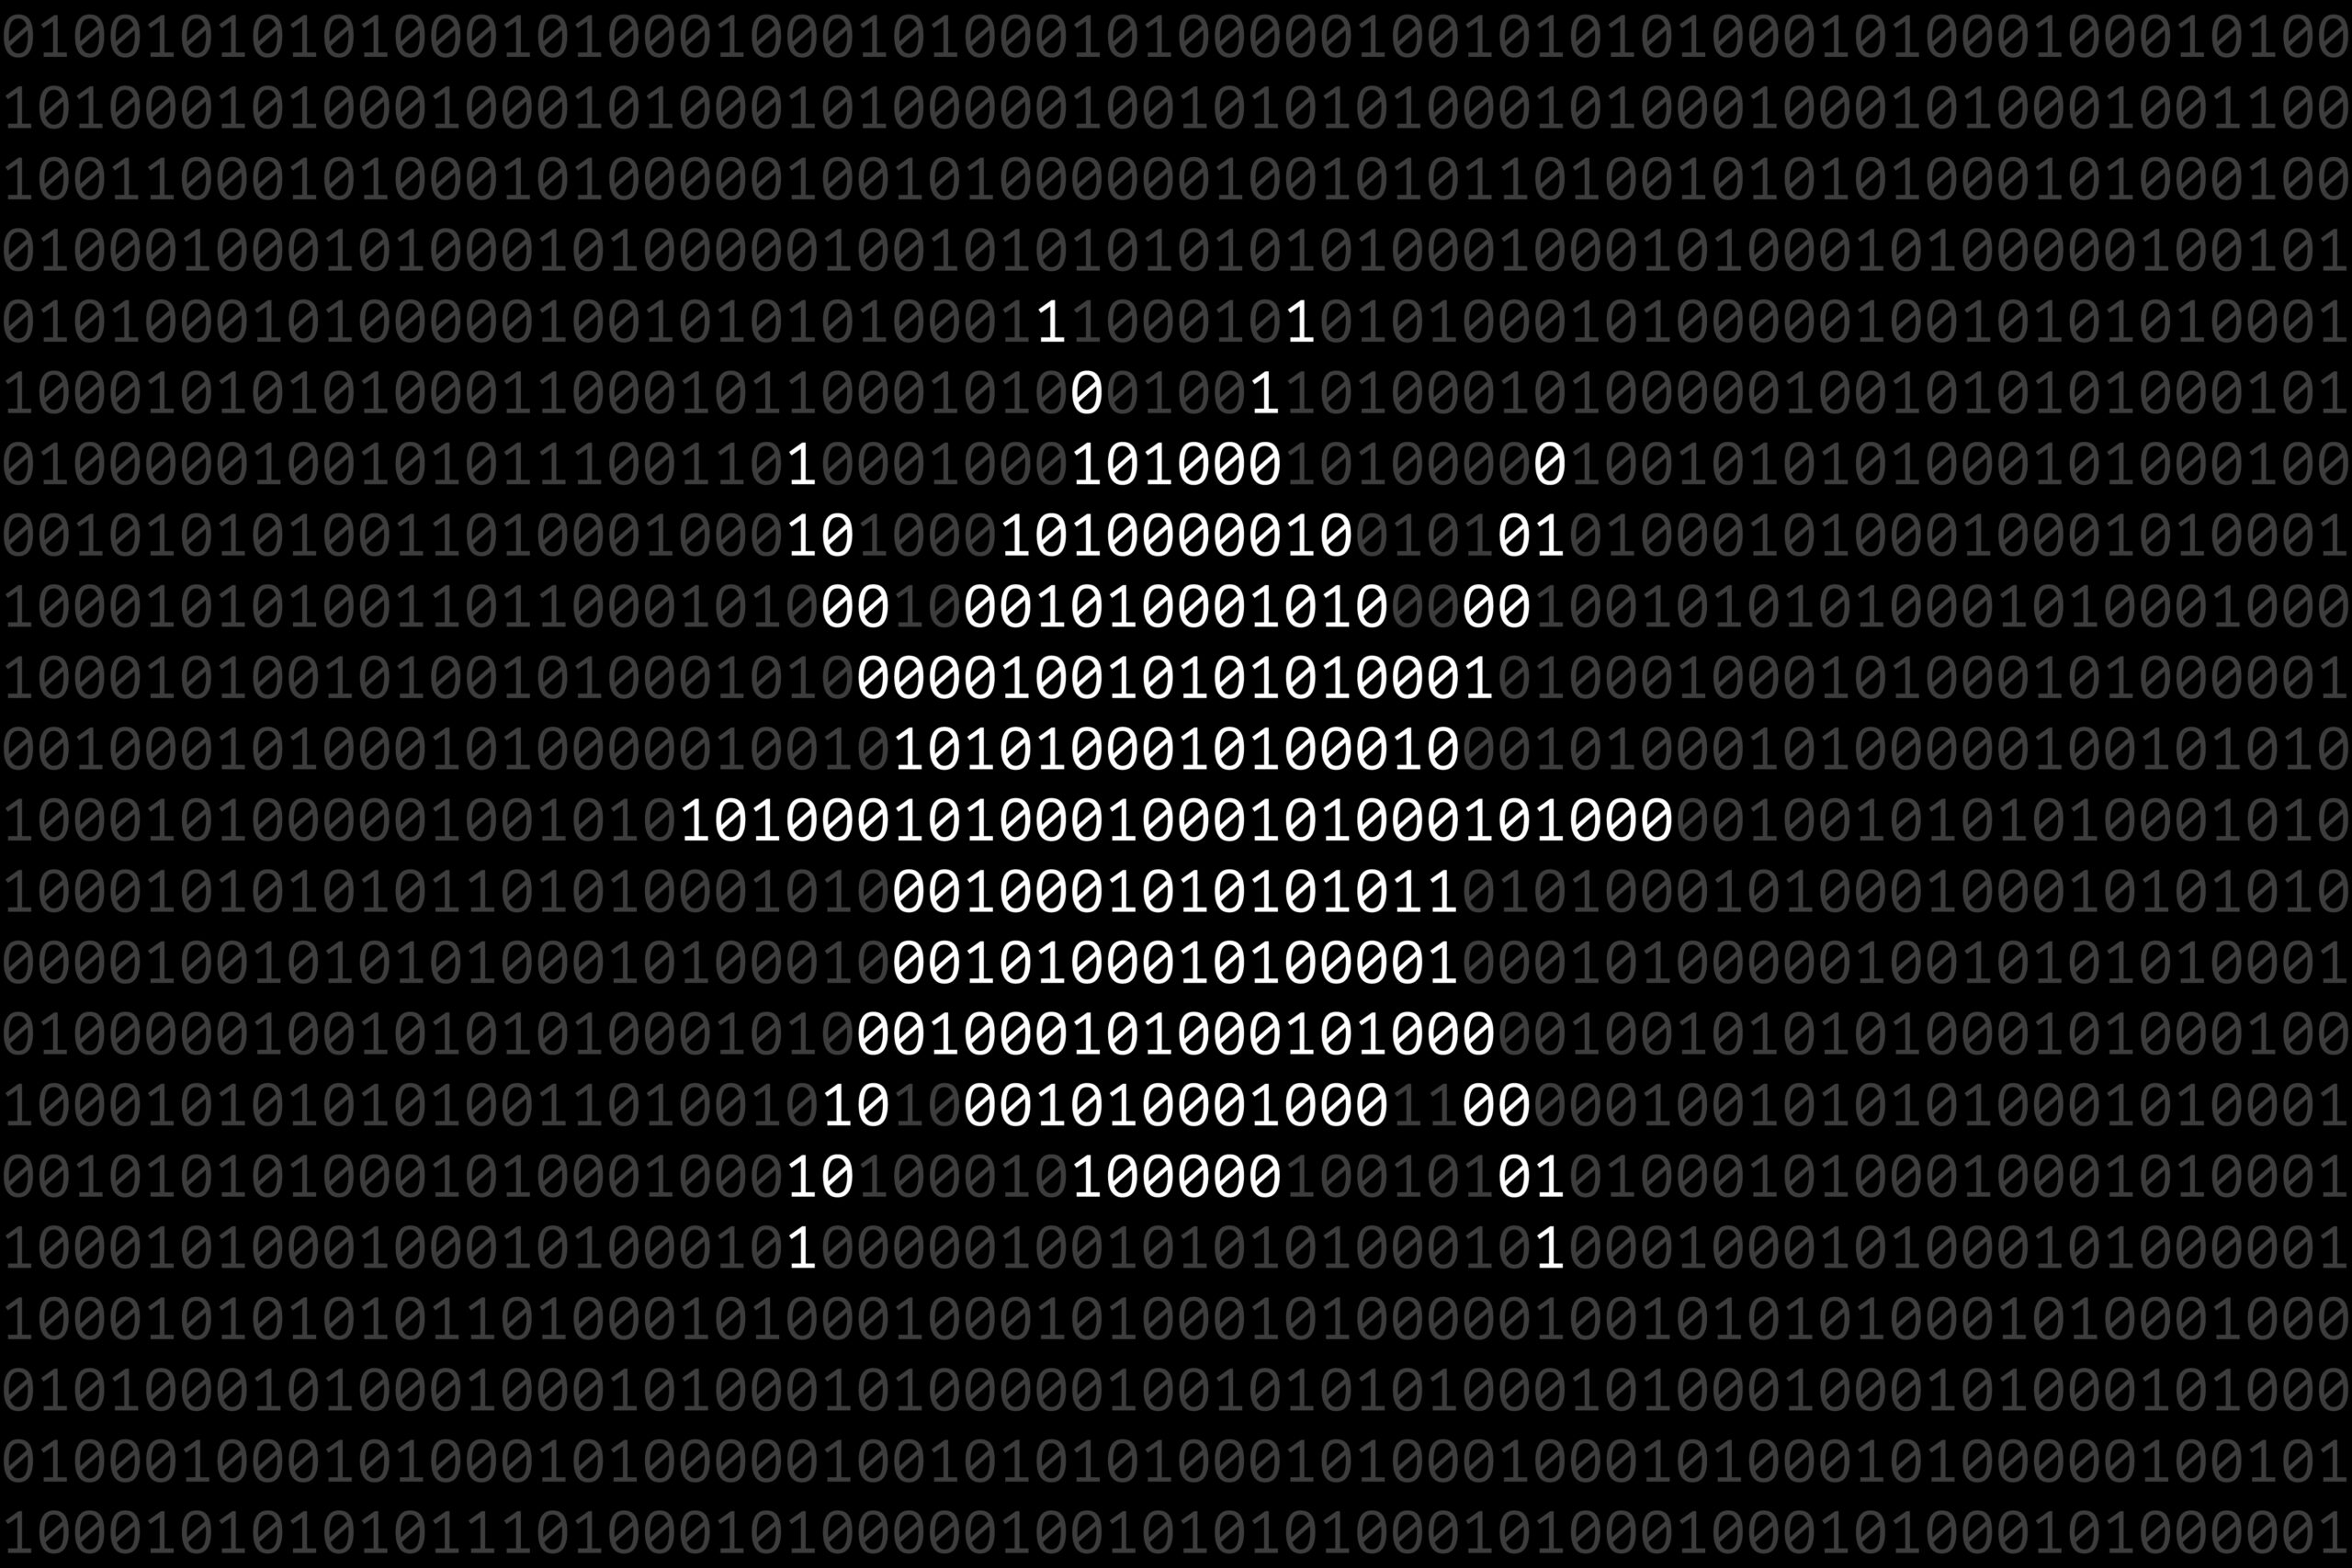 alternating white and black binary code that creates an image of a bug